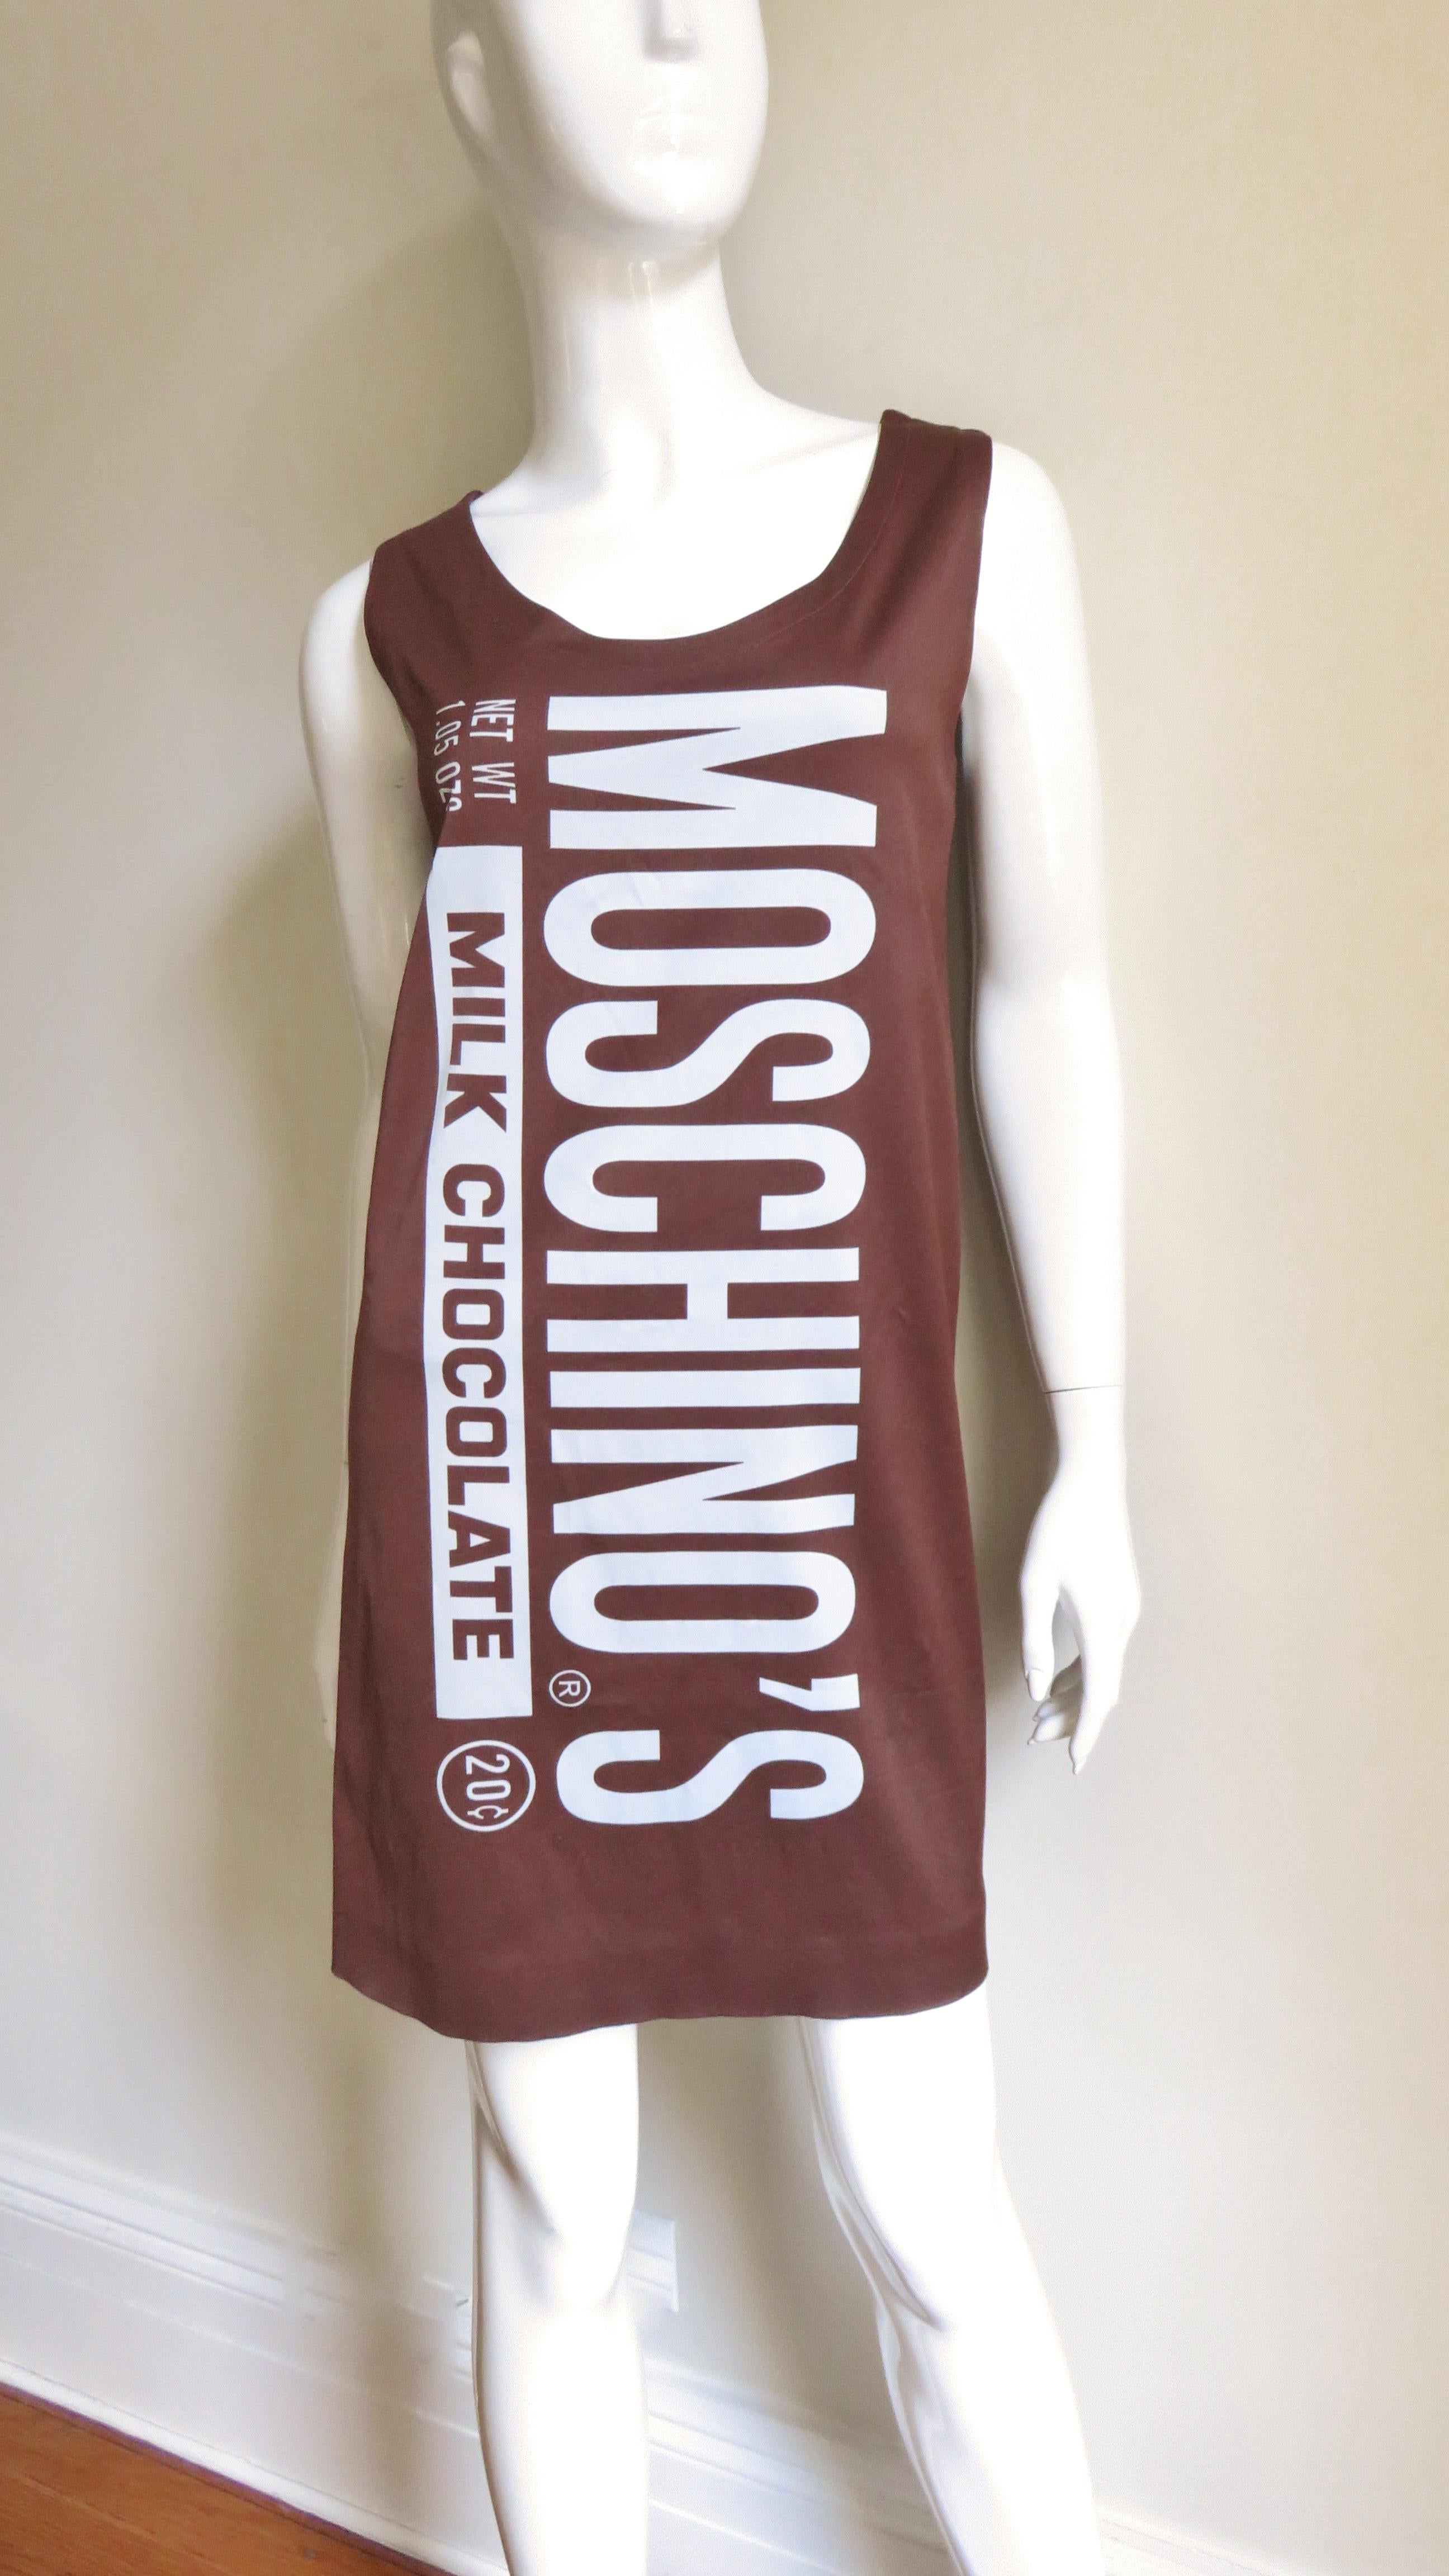 Jeremy Scott New Moschino Chocolate Bar Dress In New Condition For Sale In Water Mill, NY